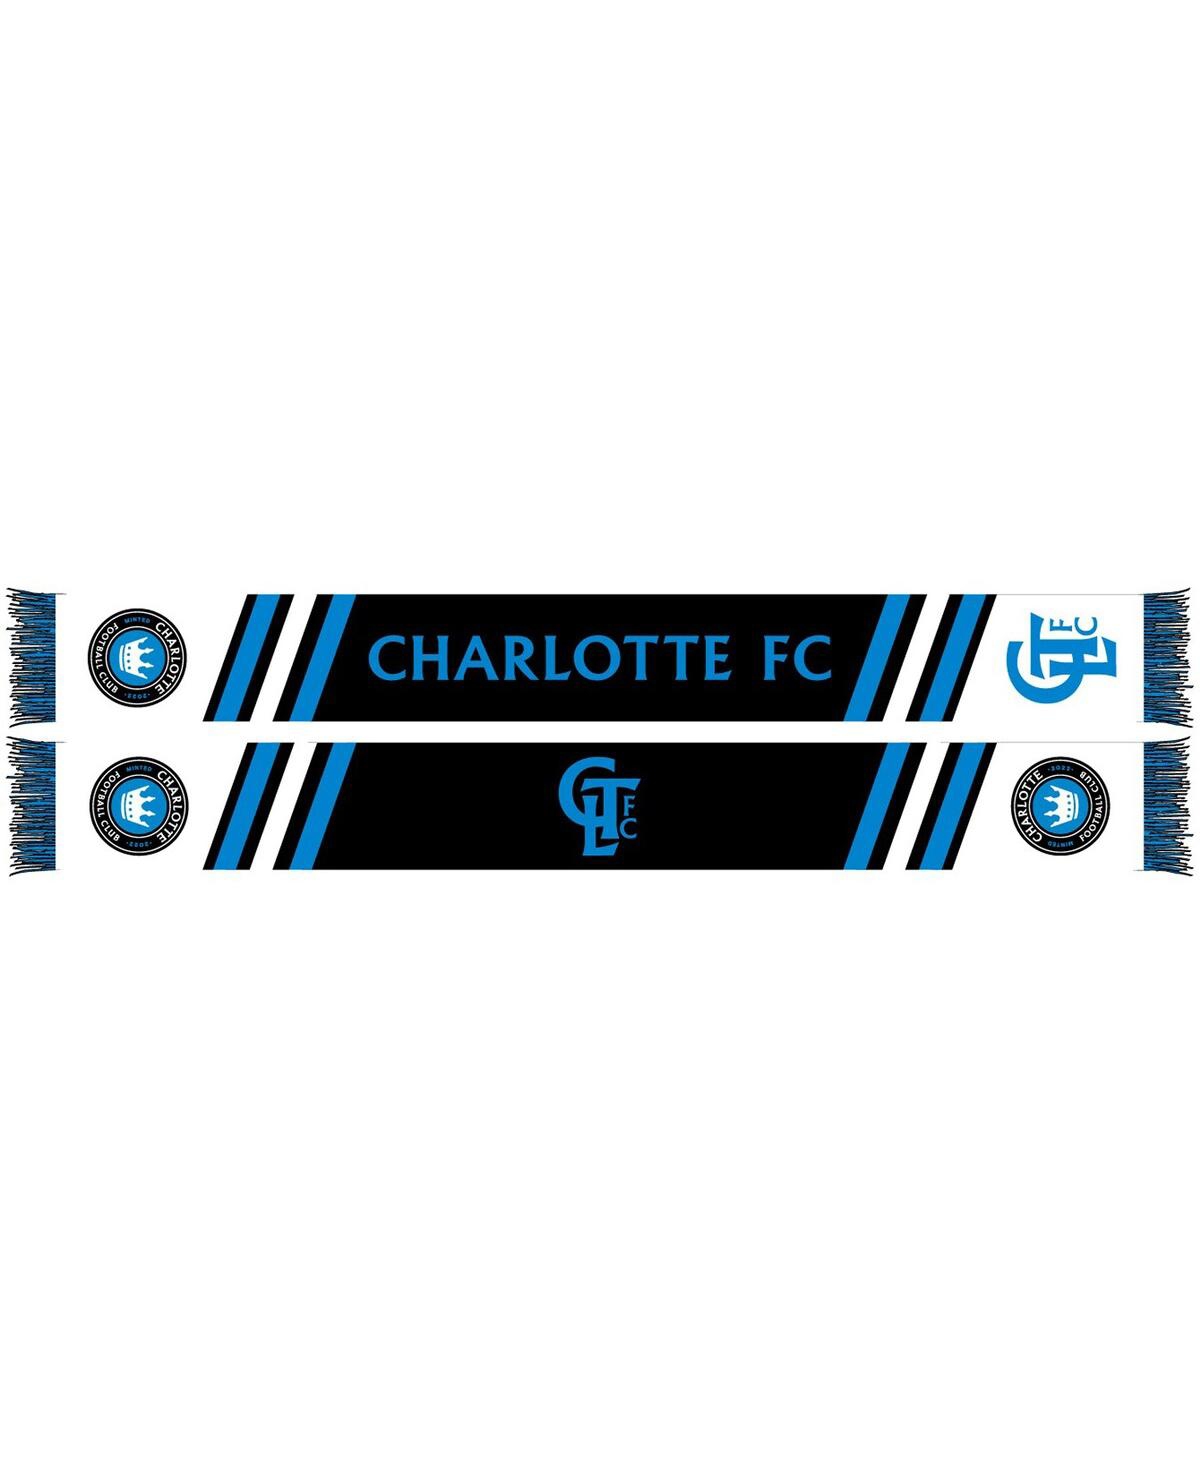 Men's and Women's Black Charlotte Fc Secondary Striped Knit Scarf - Black